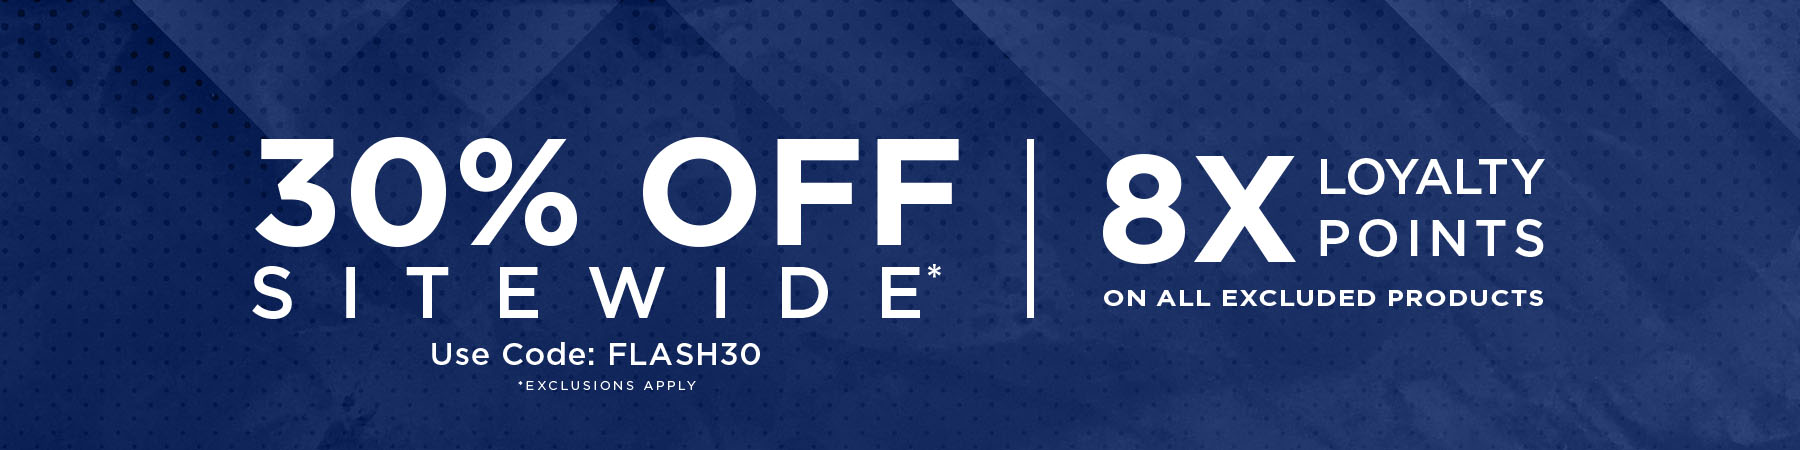 30% off Sitewide with Code FLASH30 + 8x loyalty points on excluded products